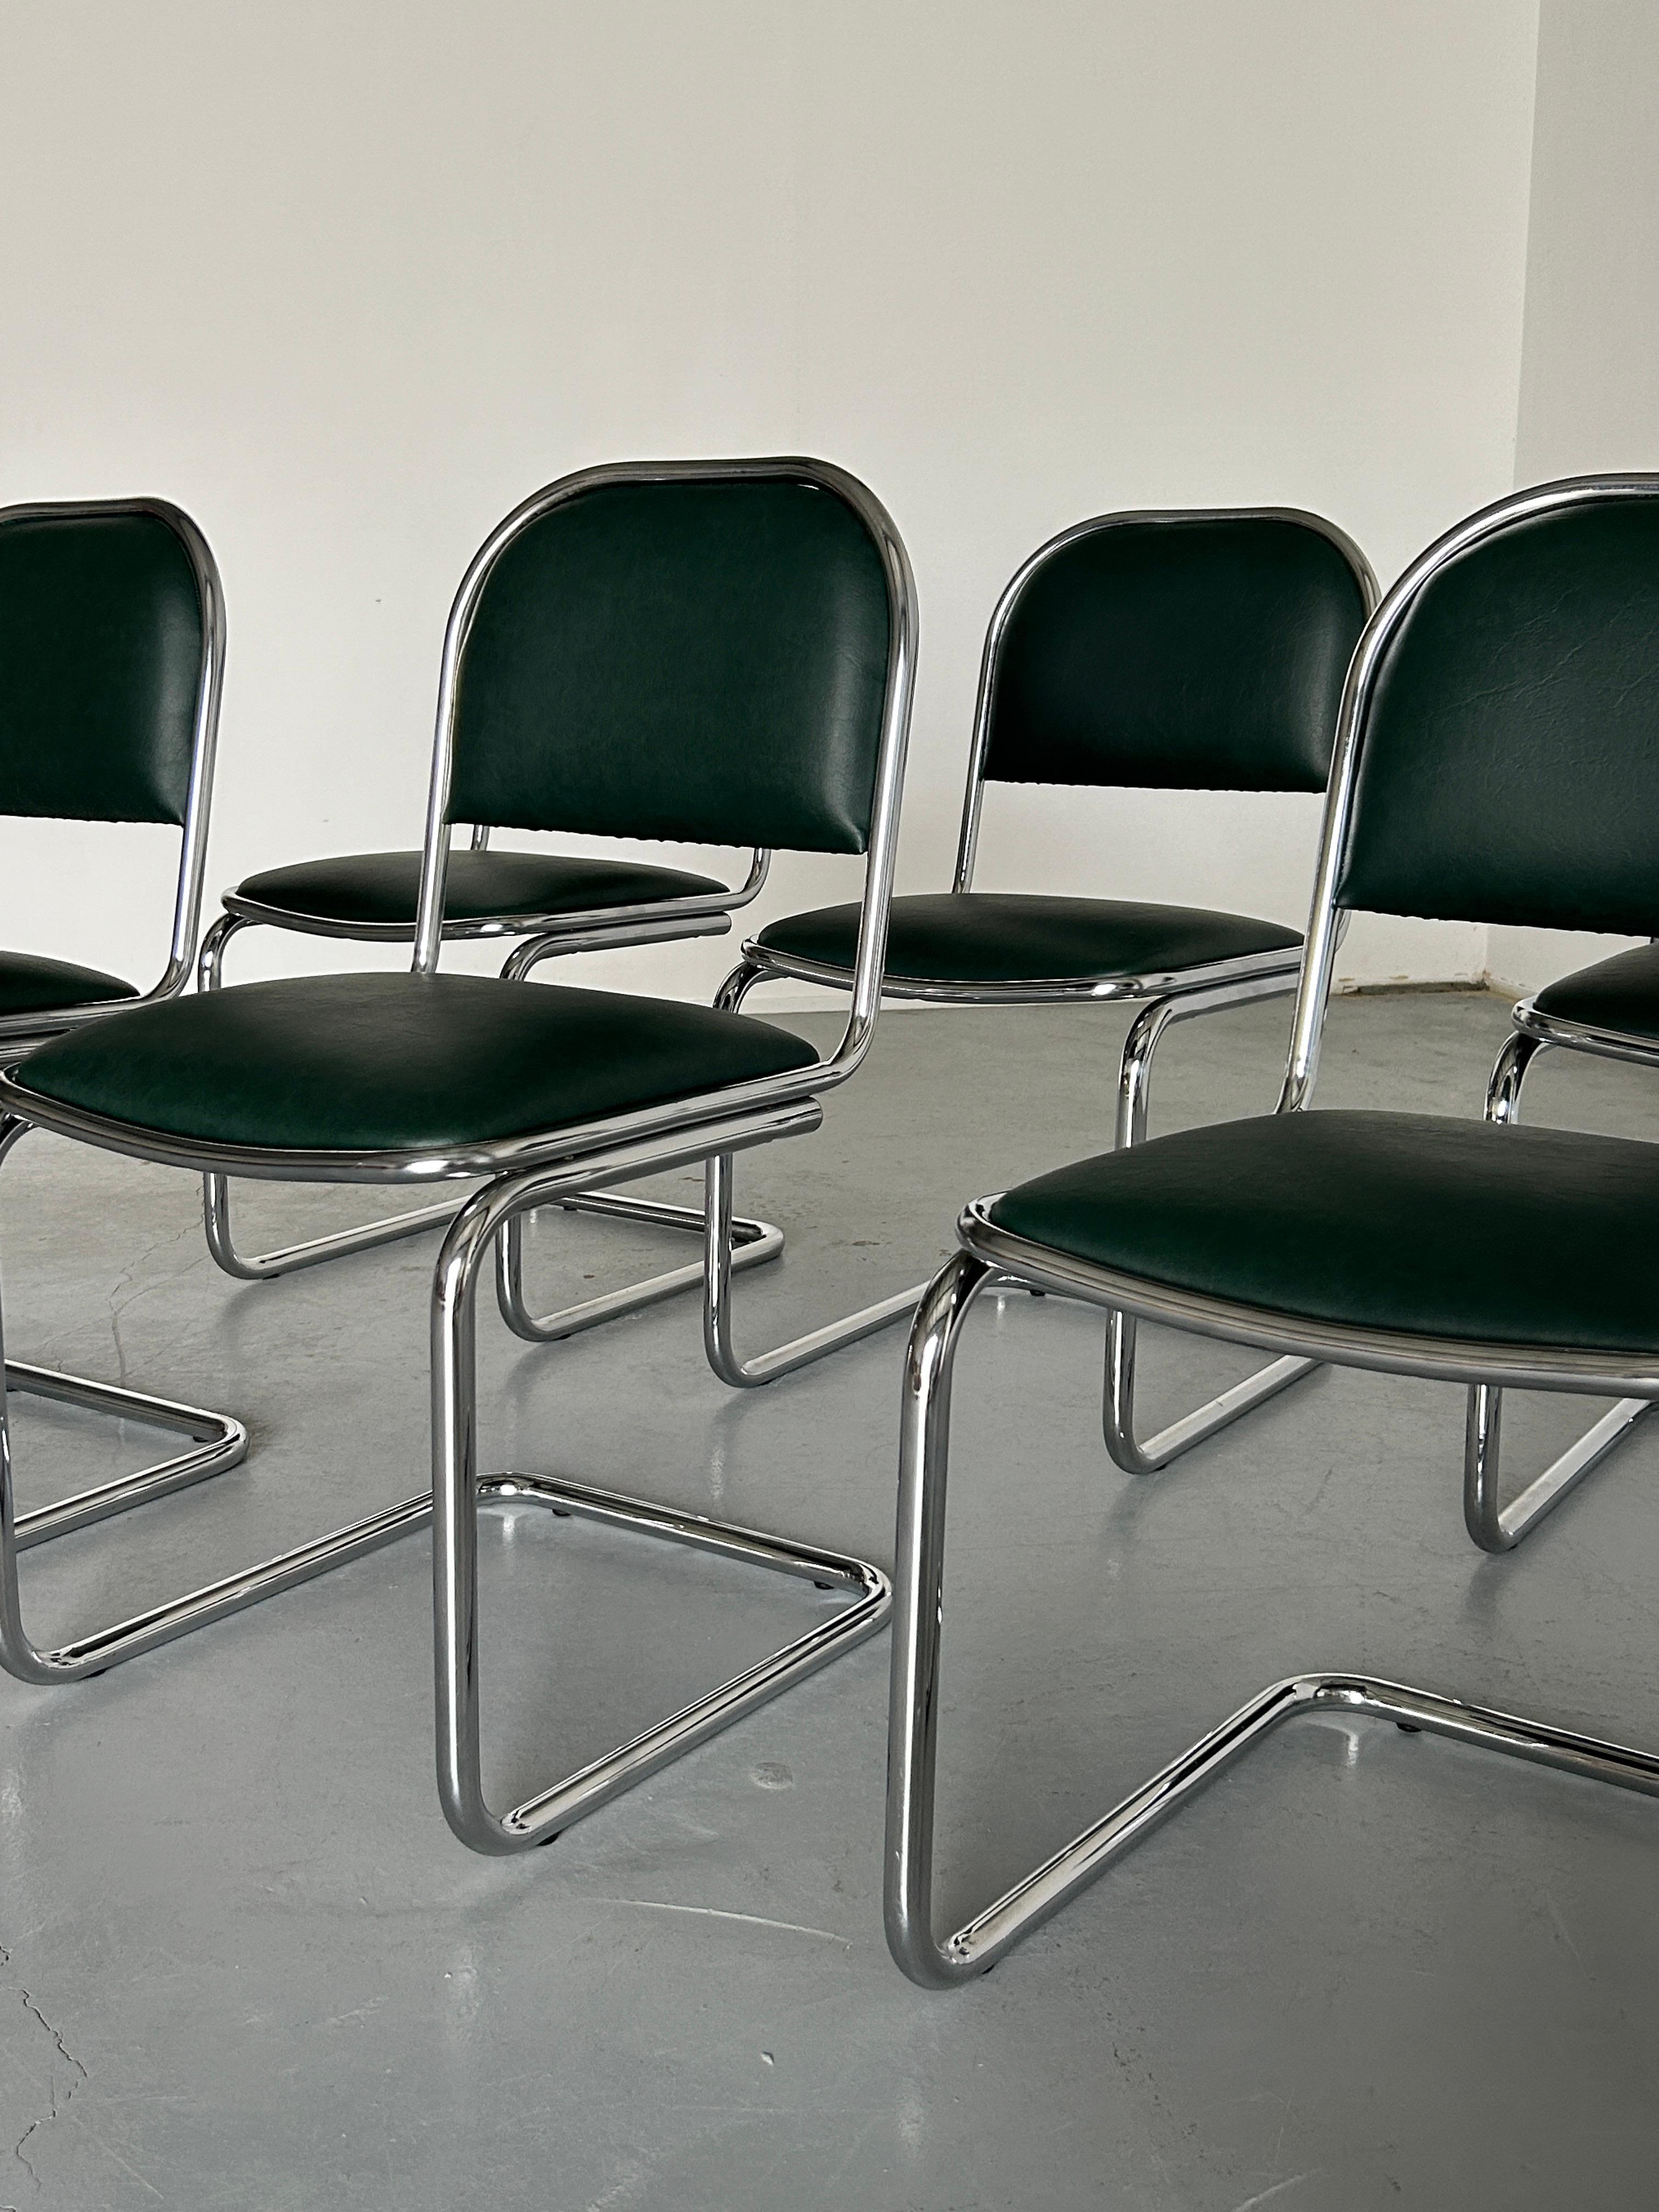  1 of 6 Bauhaus Design Chrome Tubular Steel and Green Faux Leather Chairs, 1980s For Sale 2